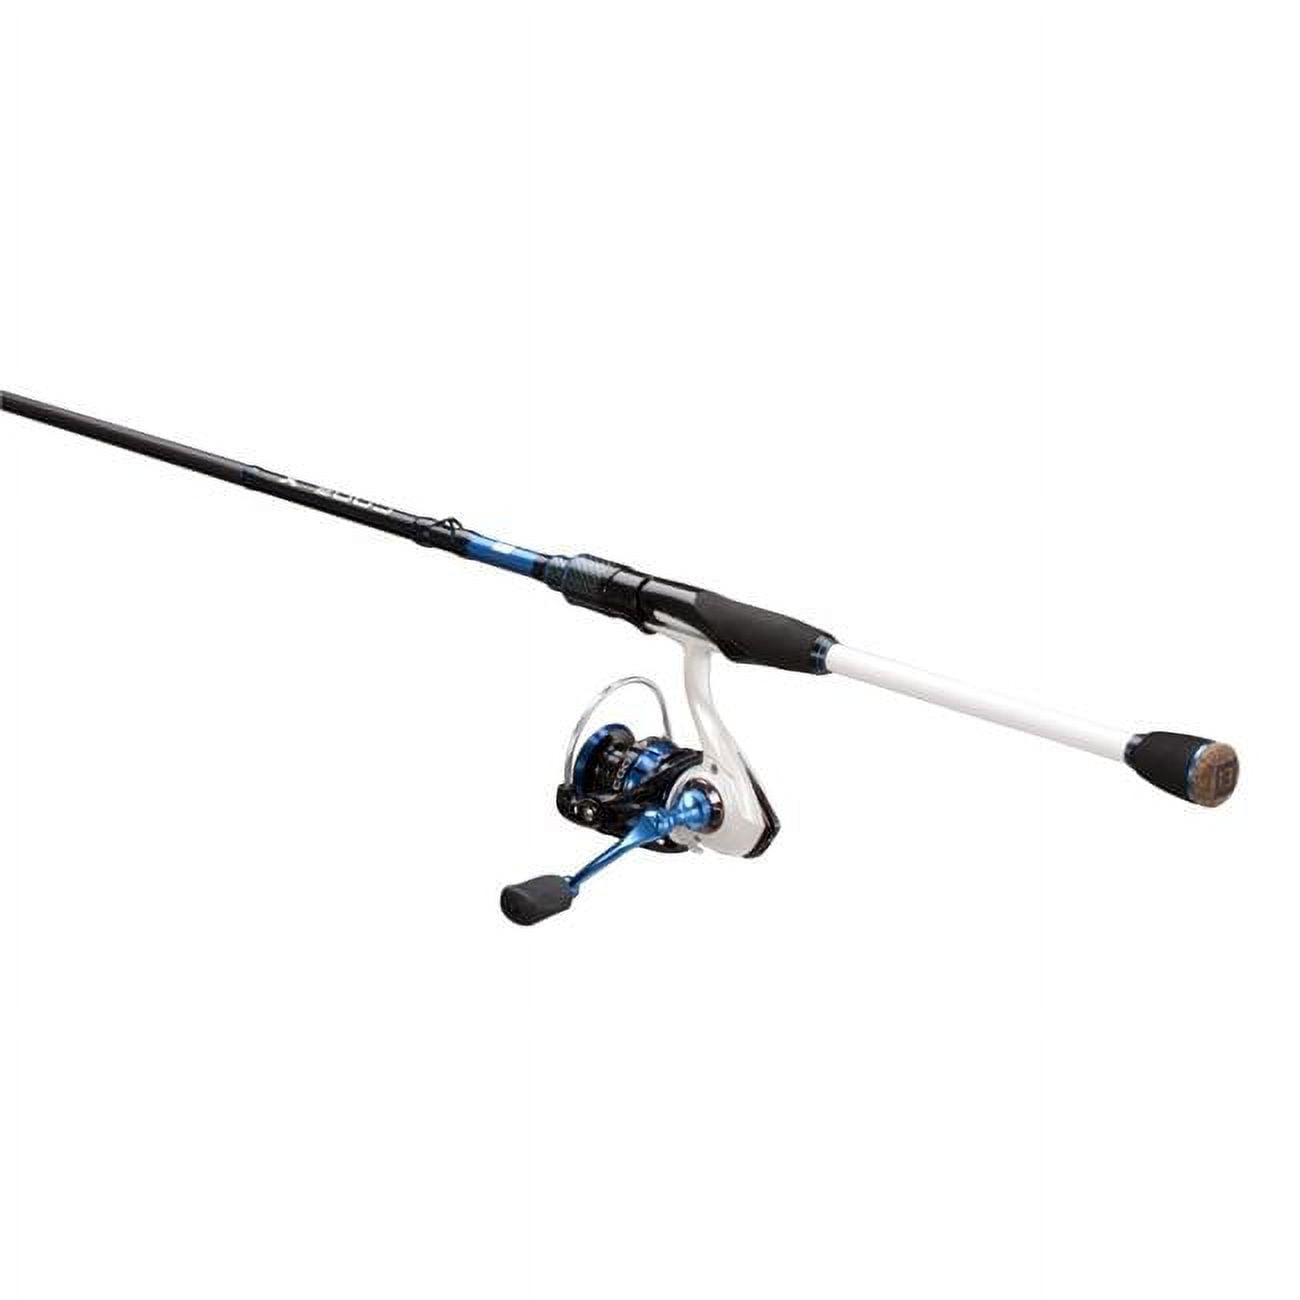 13 Fishing 1136844 7 ft. 1 in. Code M Spinning Combo 3000 Reel